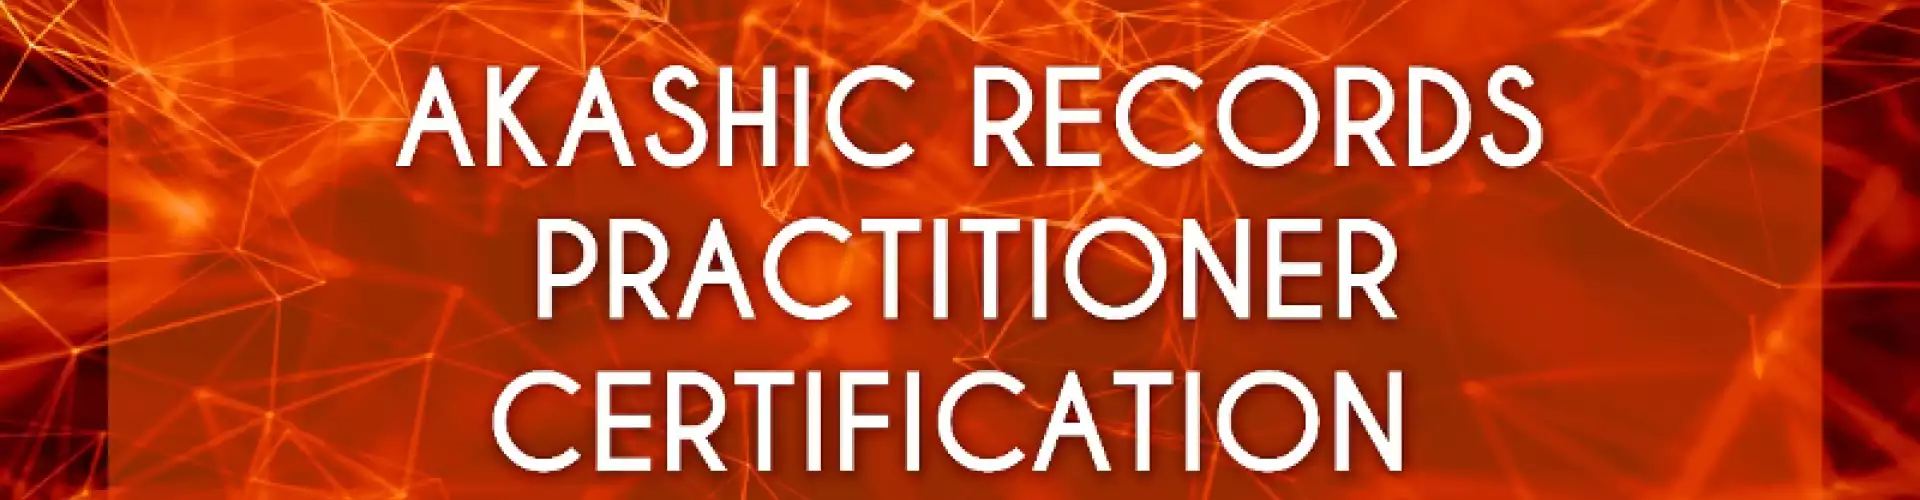 Akashic Records Practitioners Certification